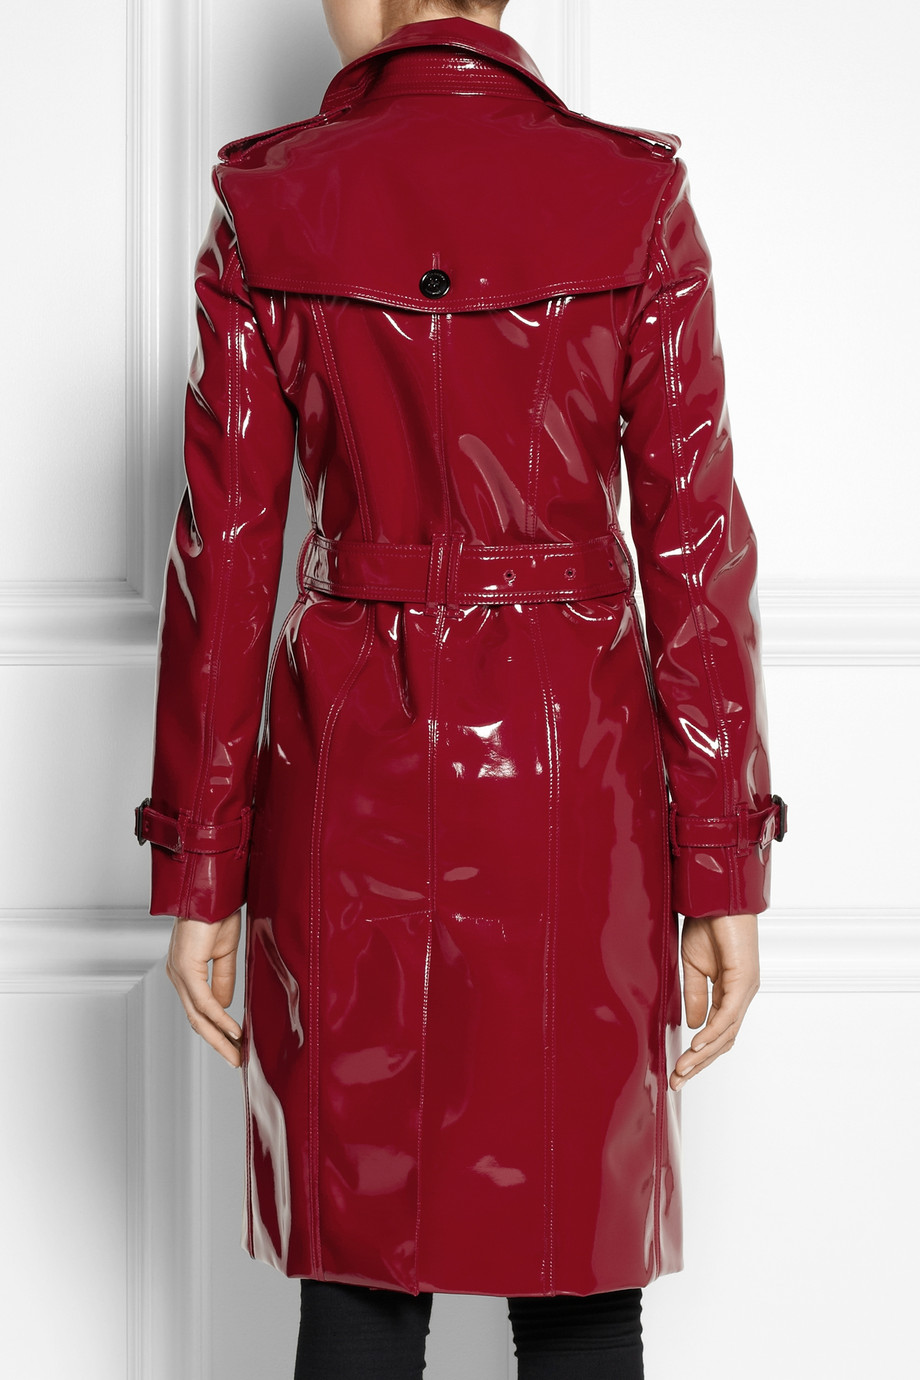 Burberry Glossed-vinyl Trench Coat in Red - Lyst